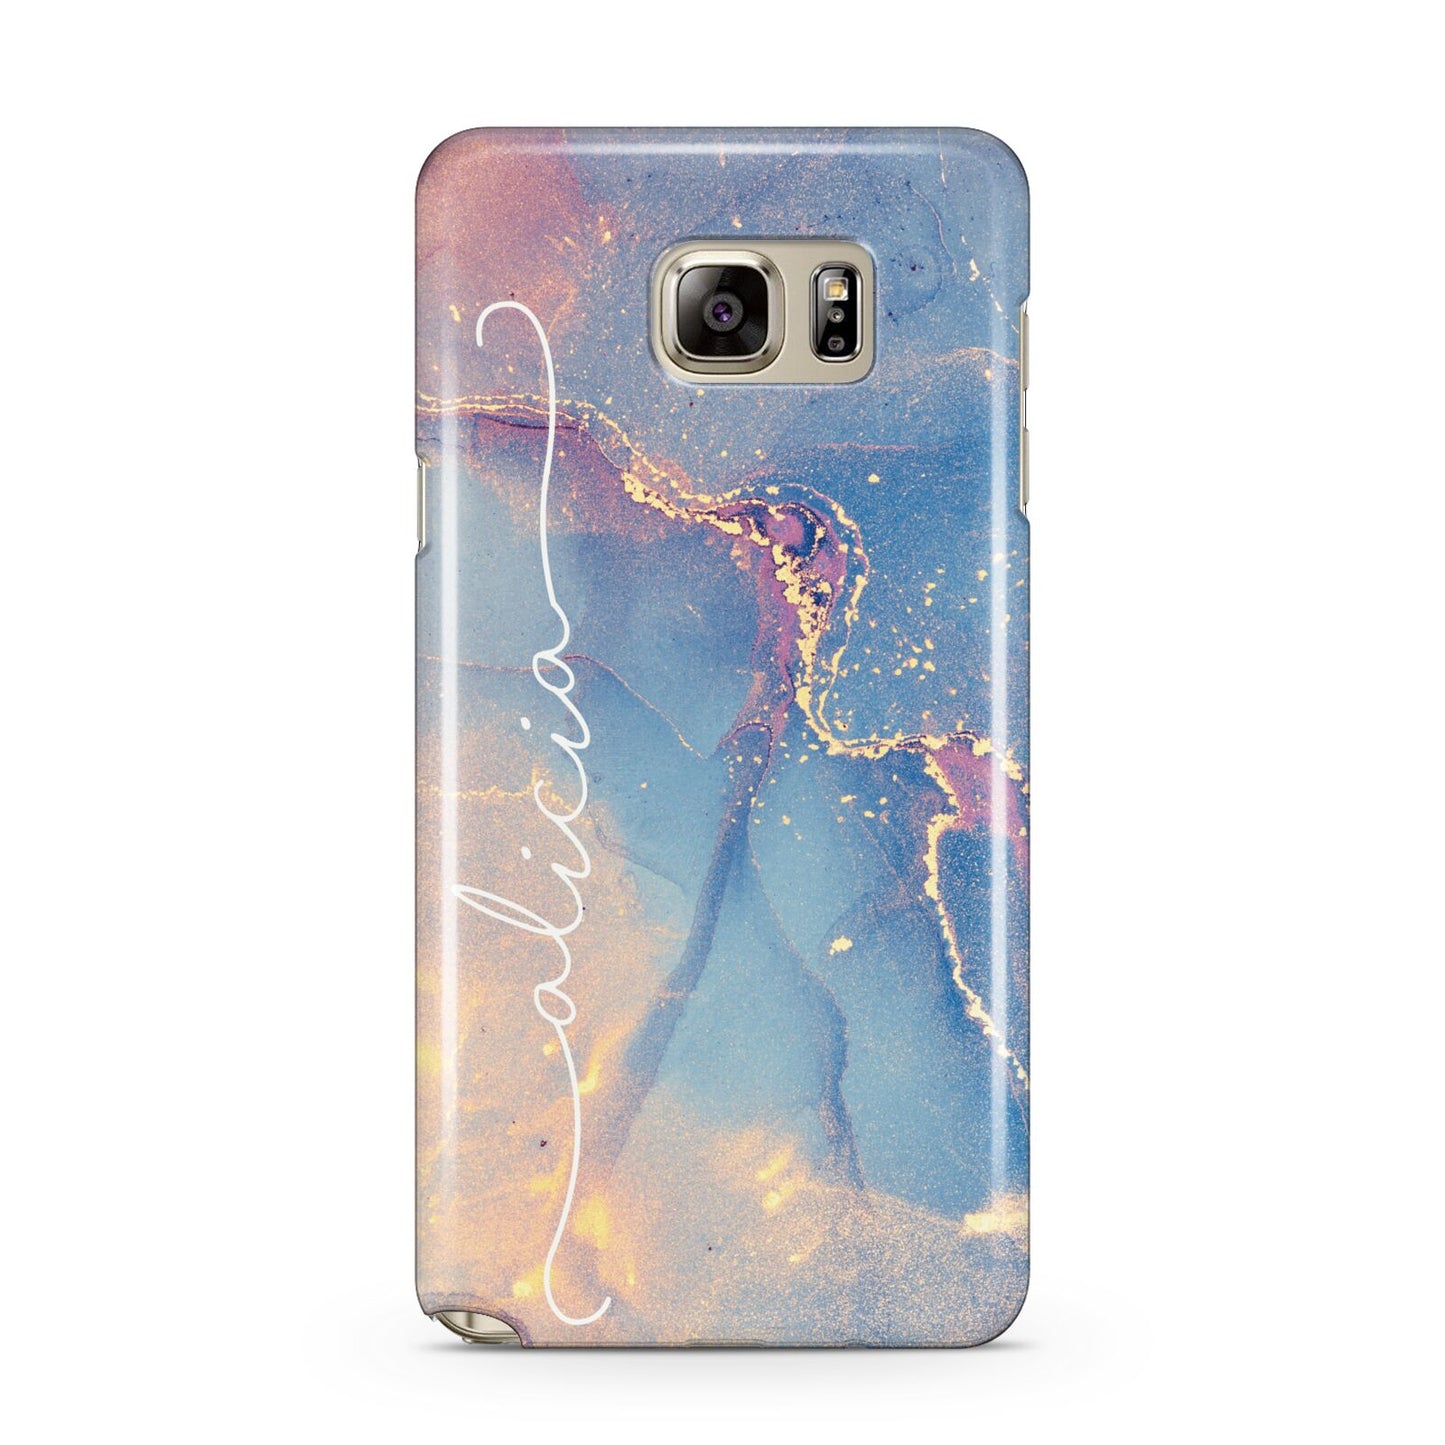 Blue and Pink Marble Samsung Galaxy Note 5 Case